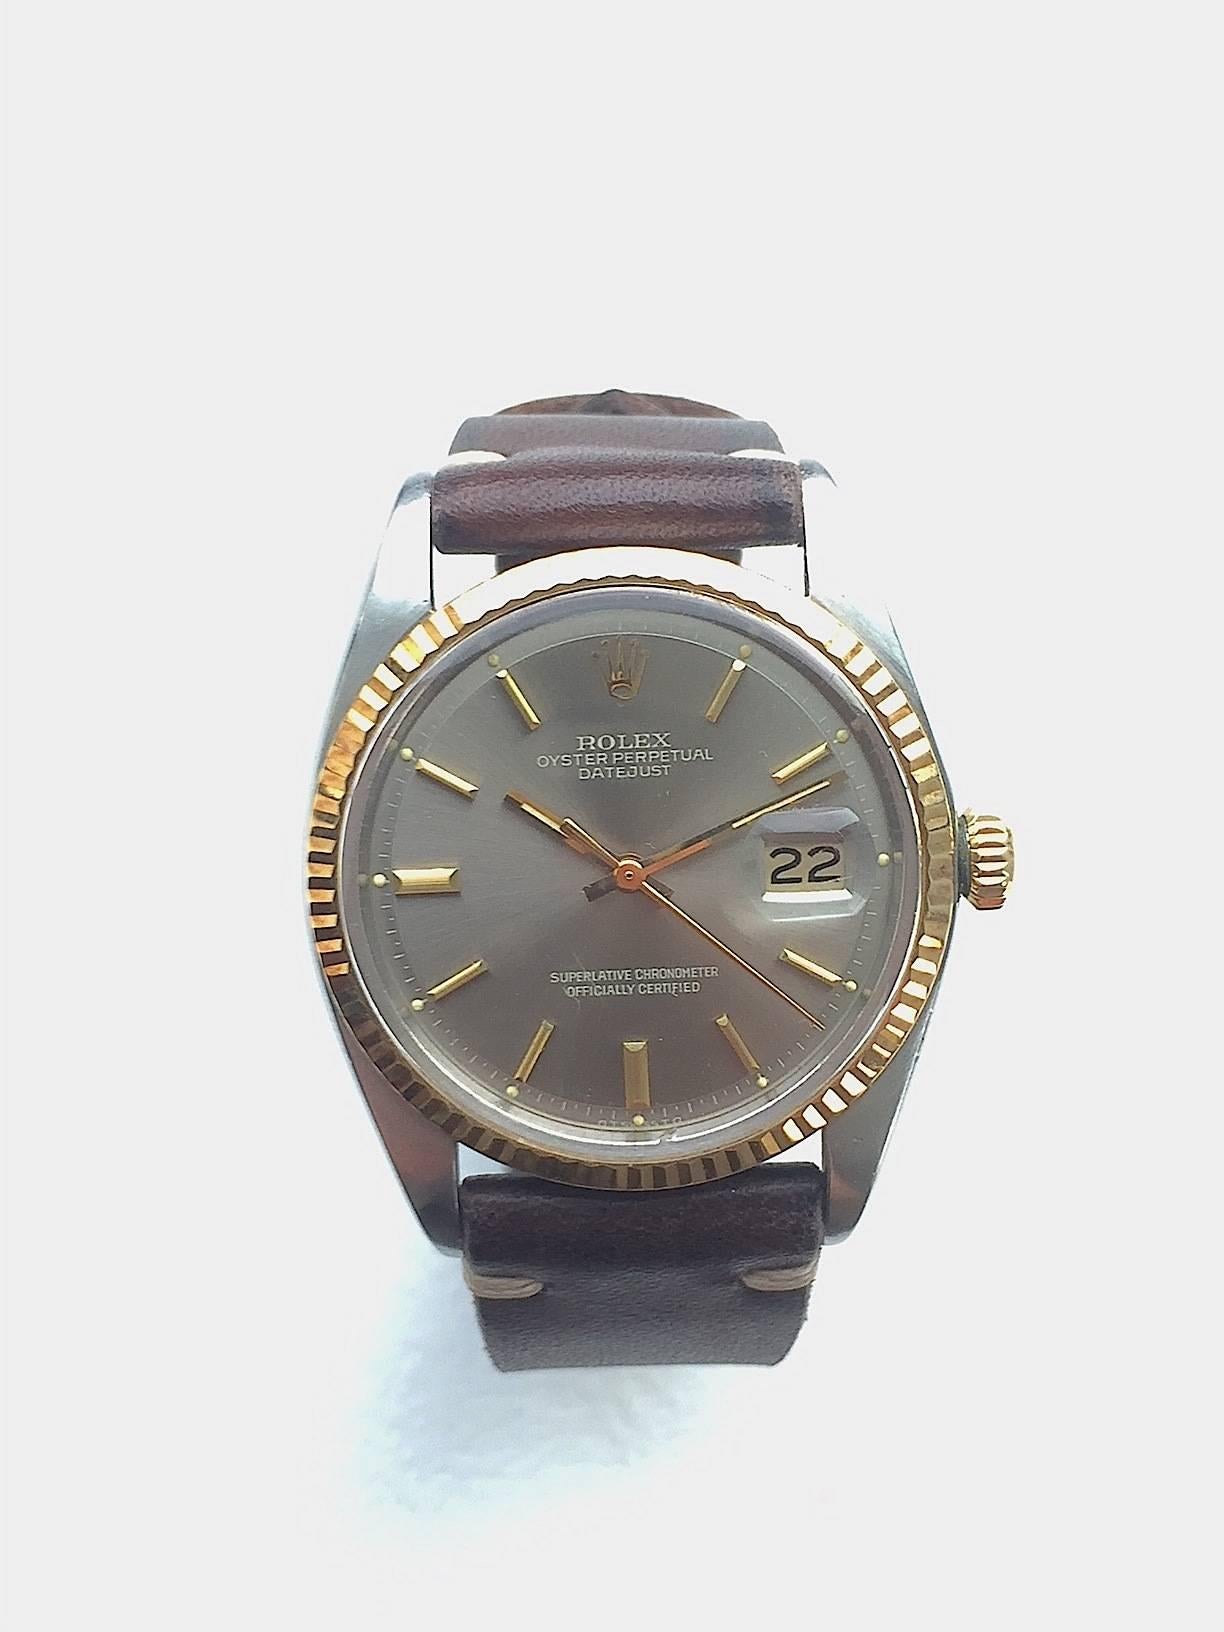 Rolex Stainless Steel and Yellow Gold Oyster Perpetual Datejust Wristwatch
Beautiful Factory Grey Sigma Dial with Yellow Gold Applied Hour Markers
Yellow Gold Gold Fluted Bezel
18K Yellow Gold Case
36mm in size 
Features Rolex Automatic Movement